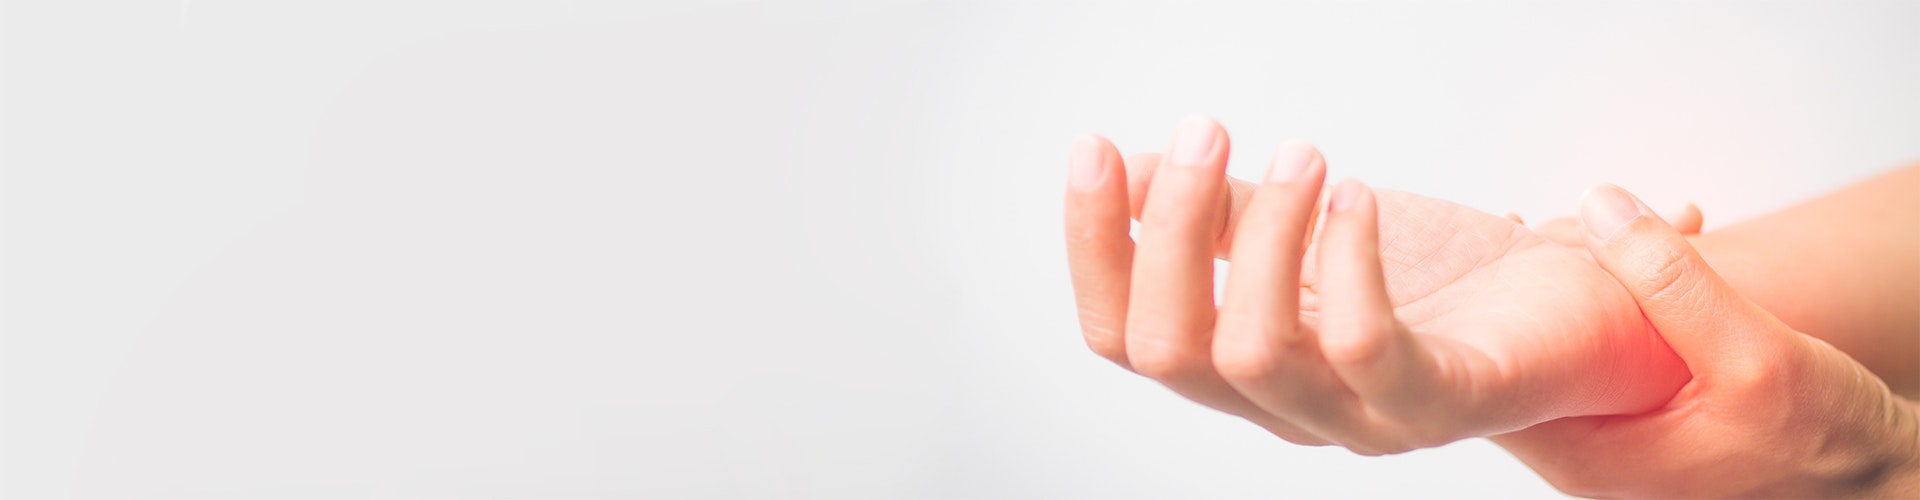 STIWELL Neurorehabilitation | information about carpal tunnel syndrome